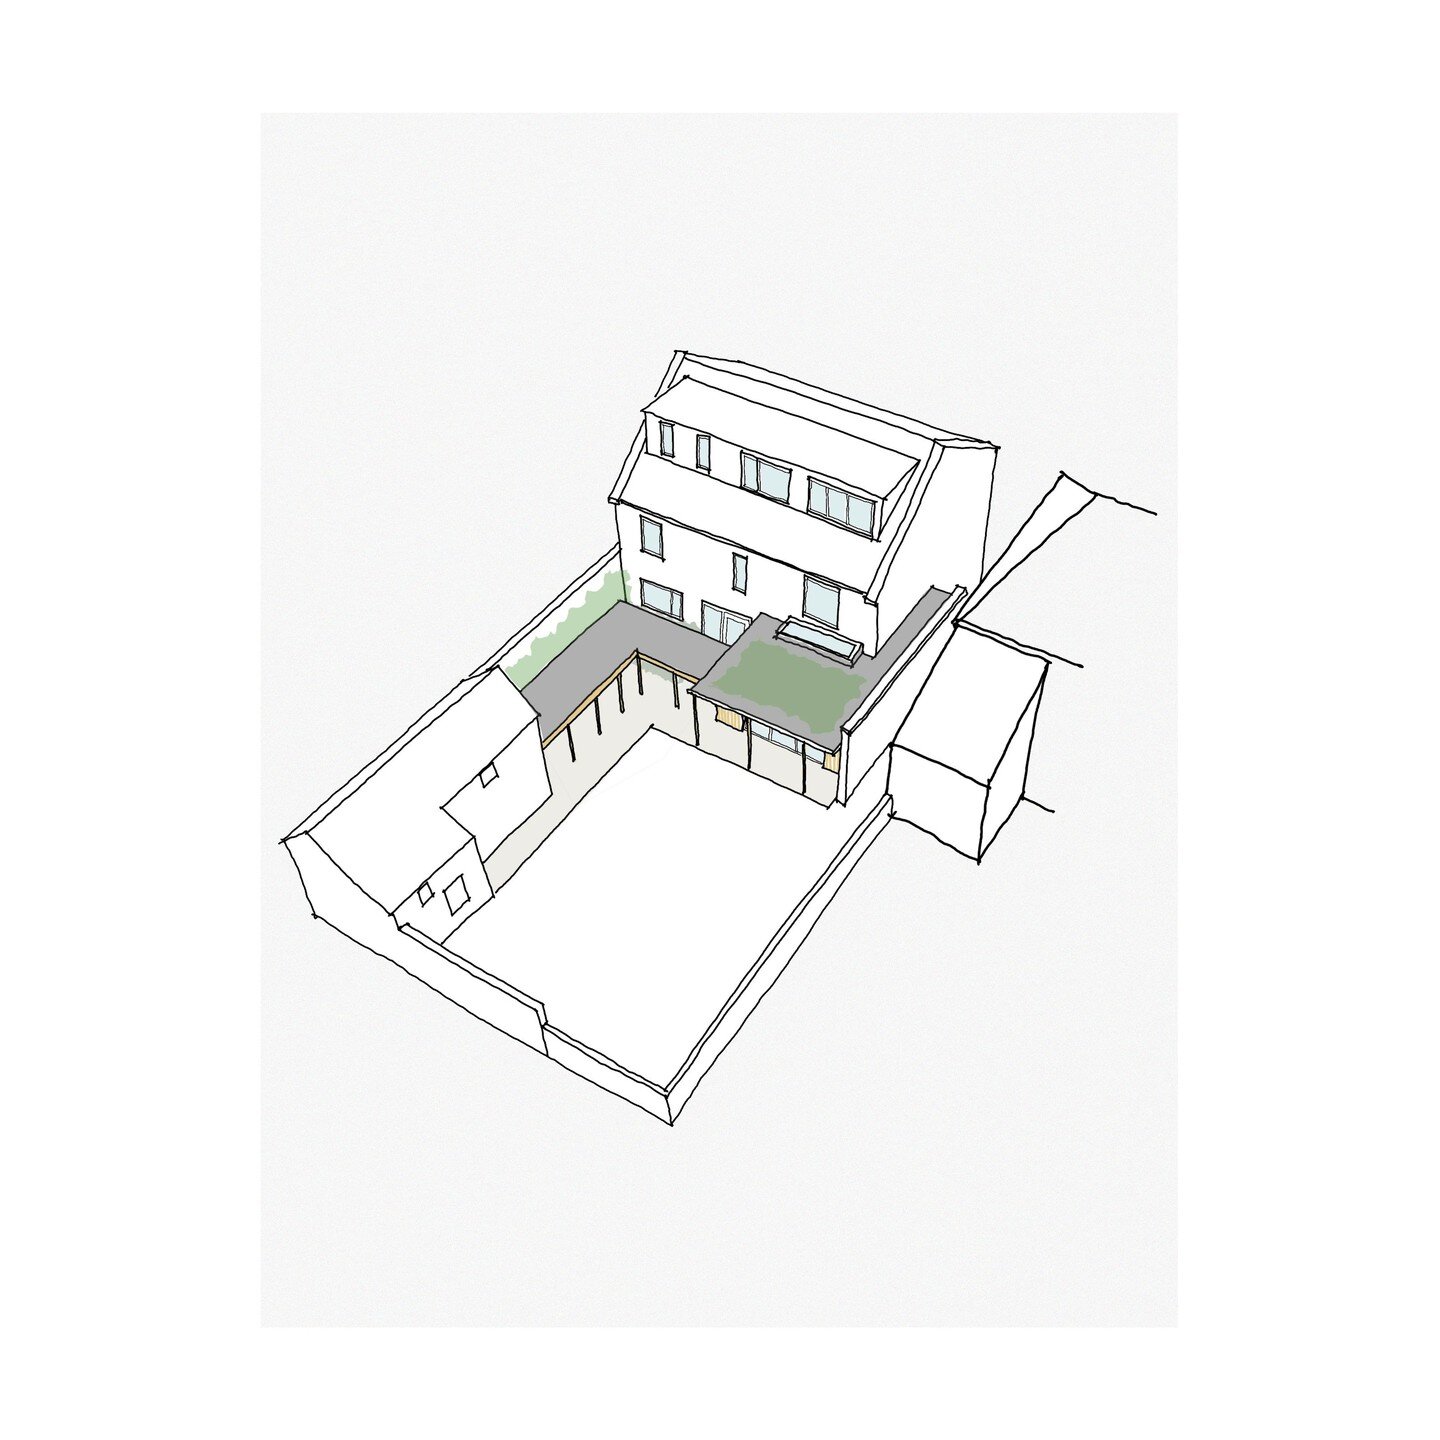 Complete house refurbishment and extension project in Sheffield beginning to take shape!

The original detached townhouse had been significantly altered and split into two flats. The building fabric and former extensions did not flow or function well